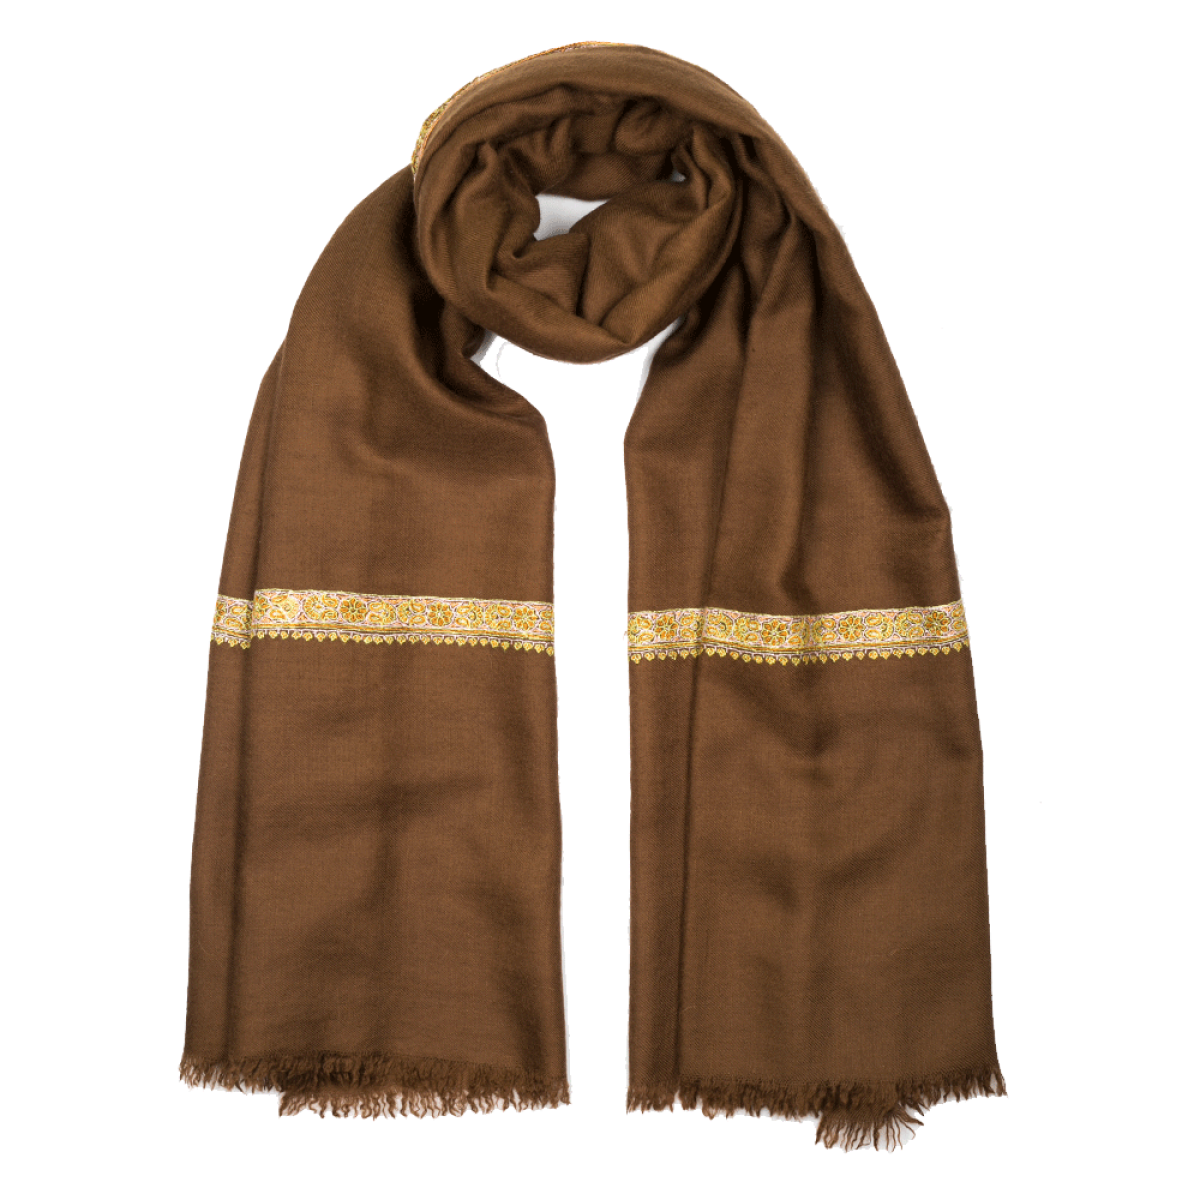 Embroidered Pashmina Stole - Mustang Brown & Orange 